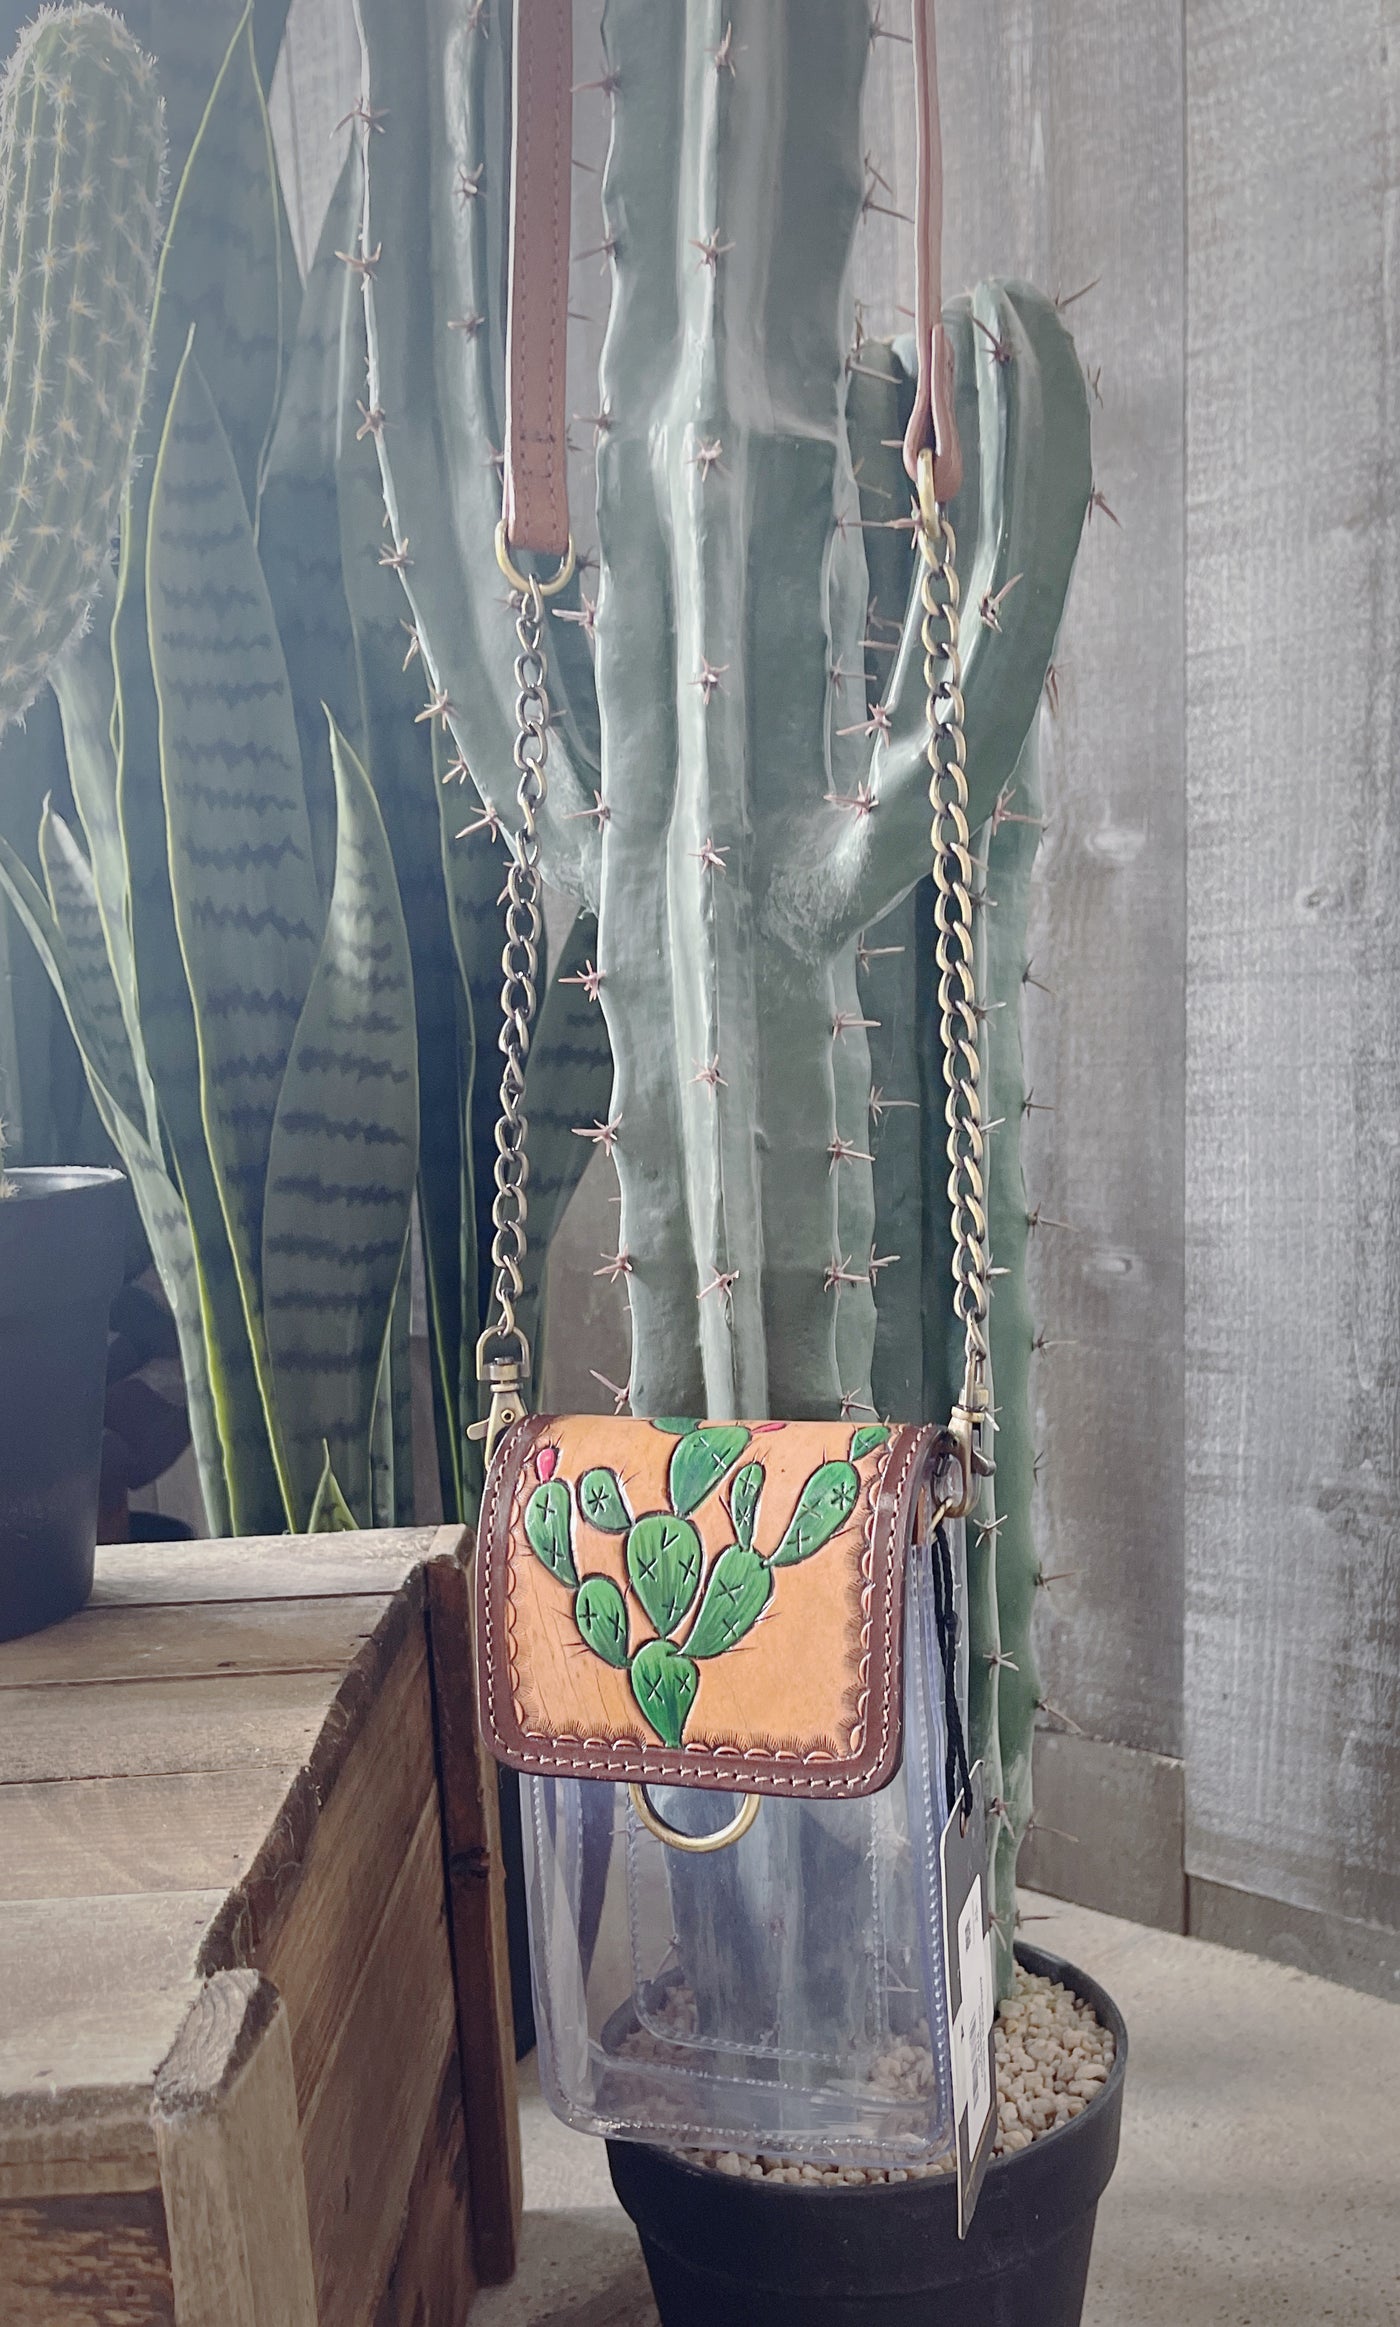 American Darling Crystal Clear Cactus and Tan Leather Cross Body